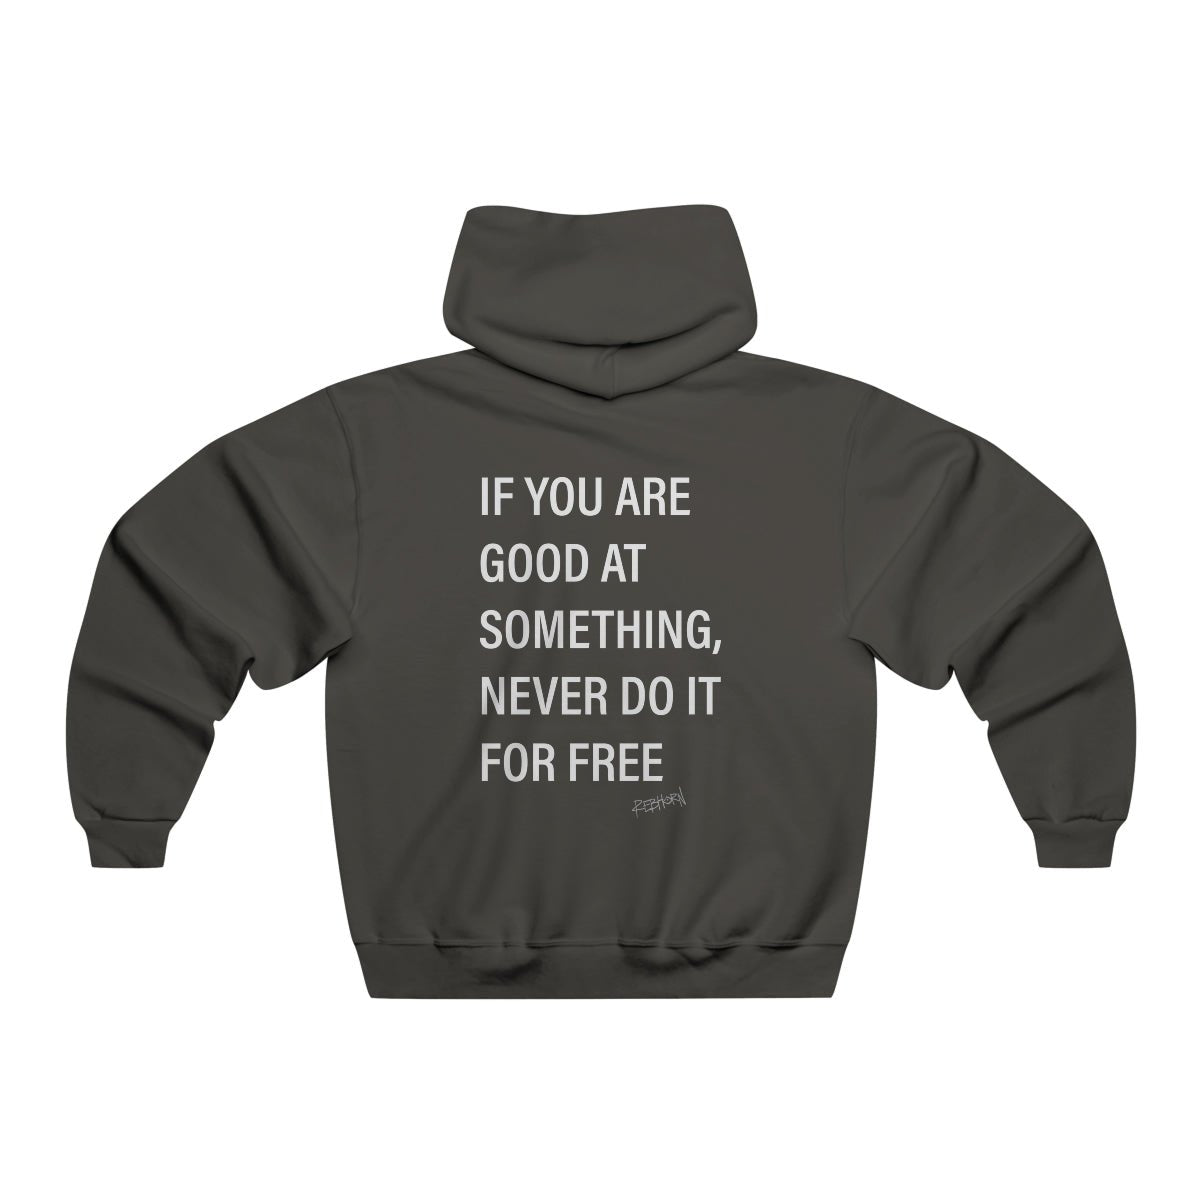 If You're Good At Something Never Do It For Free Hooded Sweatshirt - REBHORN DESIGN